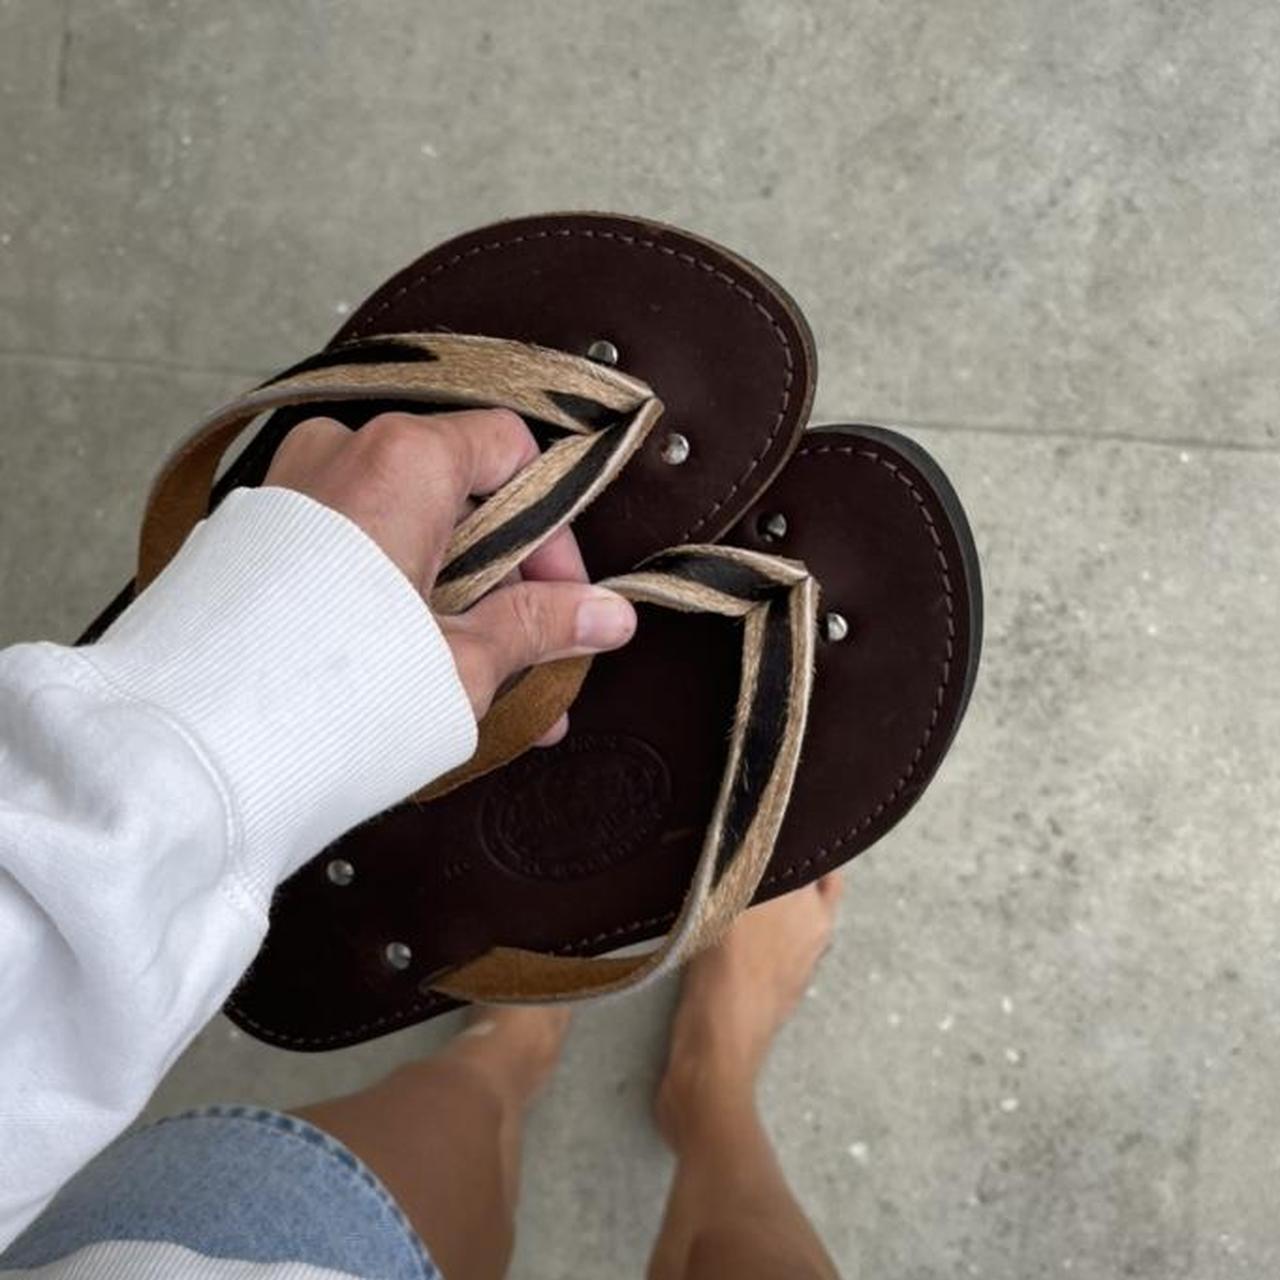 School Sandals Buying Guide 2023 | The Athlete's Foot